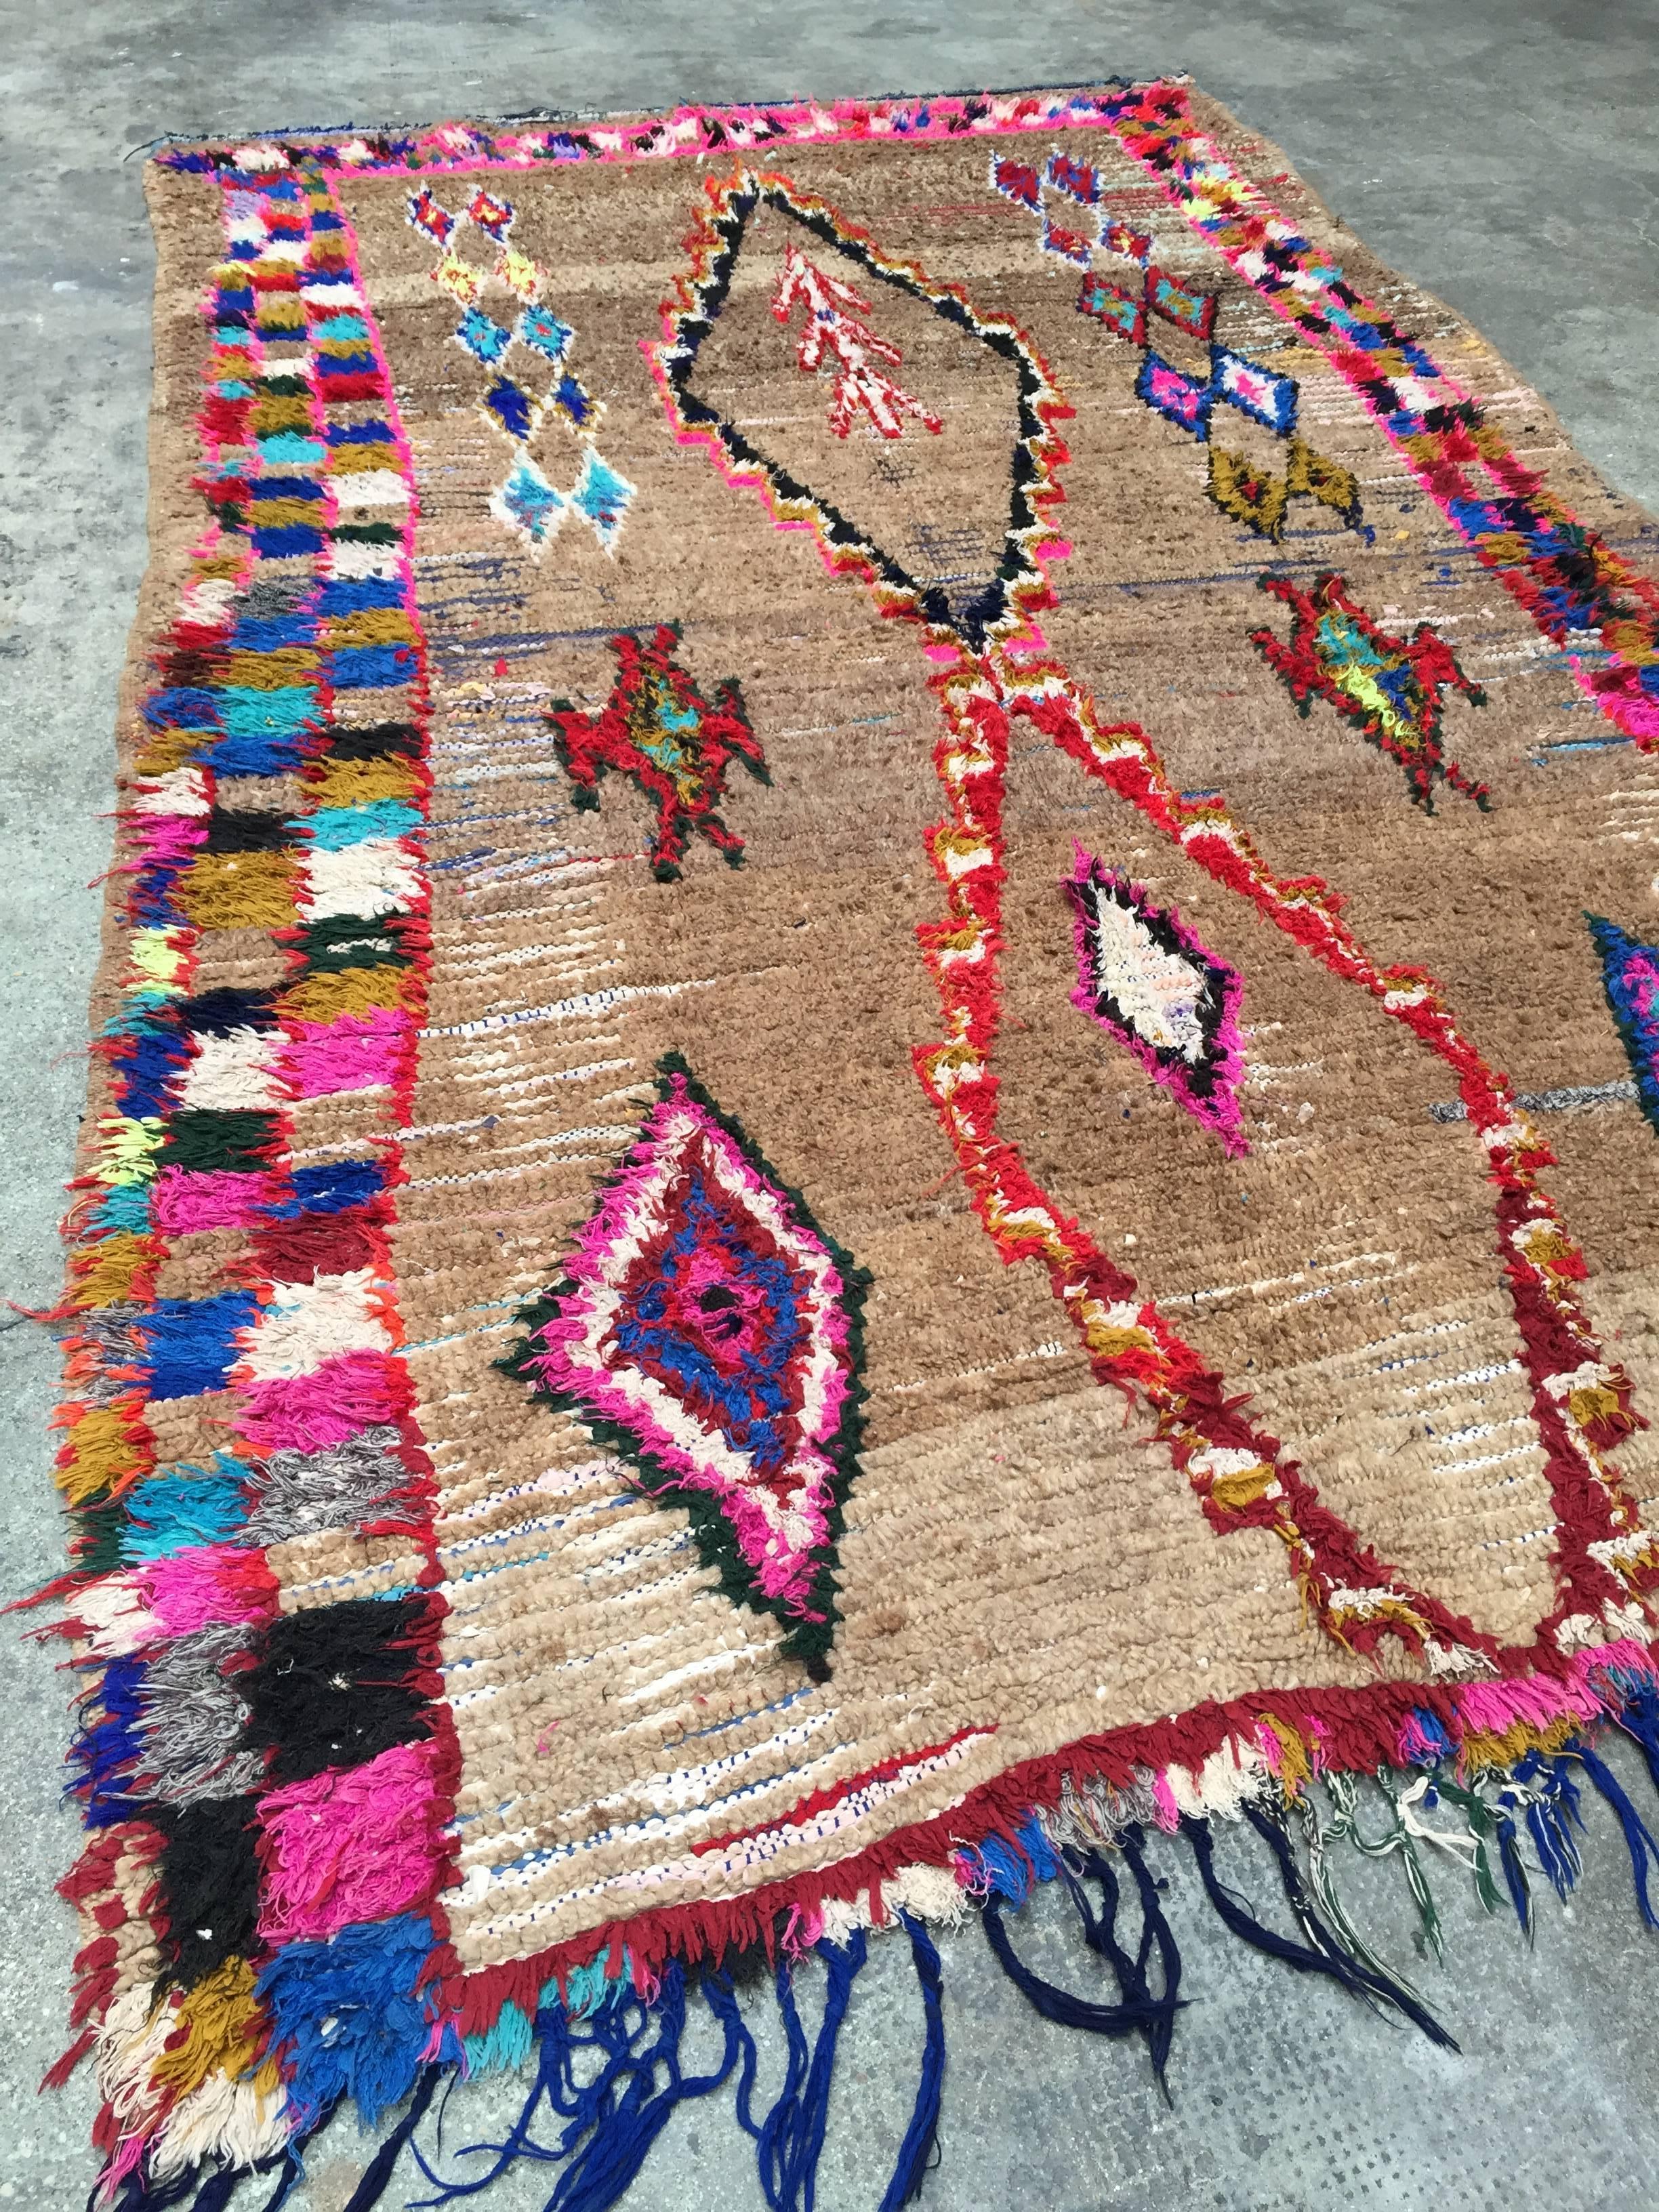 Vintage Moroccan boucherouite rug
Measures: 250 x 150 cm
Wool and fabrics
One of a kind hand-knotted rug
1980s.